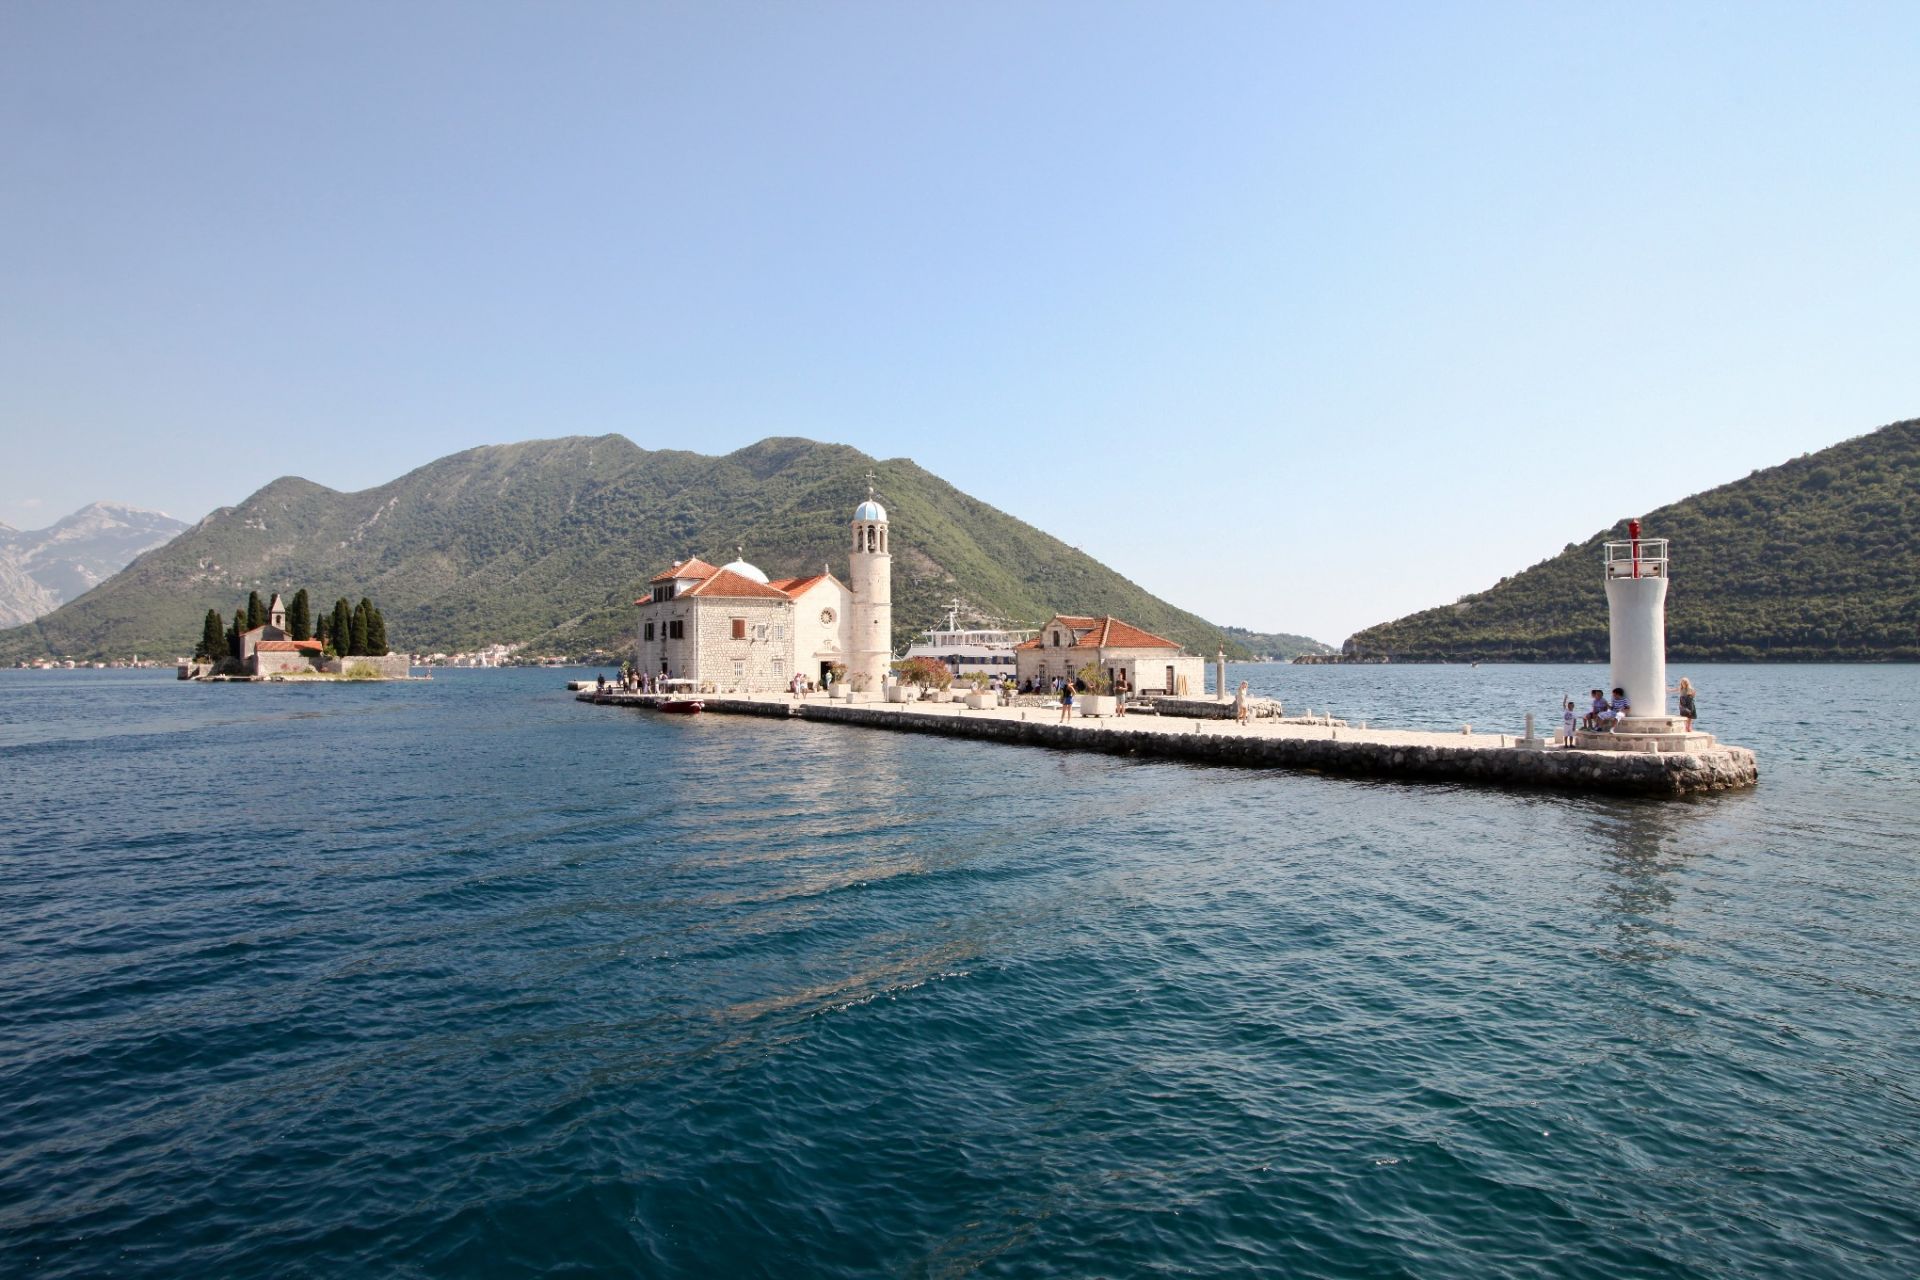 Enjoy in picturesque scenery of Boka Bay and autehntic style of the resort made with love and Montenegrin spirit, designed to blend in its magic surrondings of untouched nature.